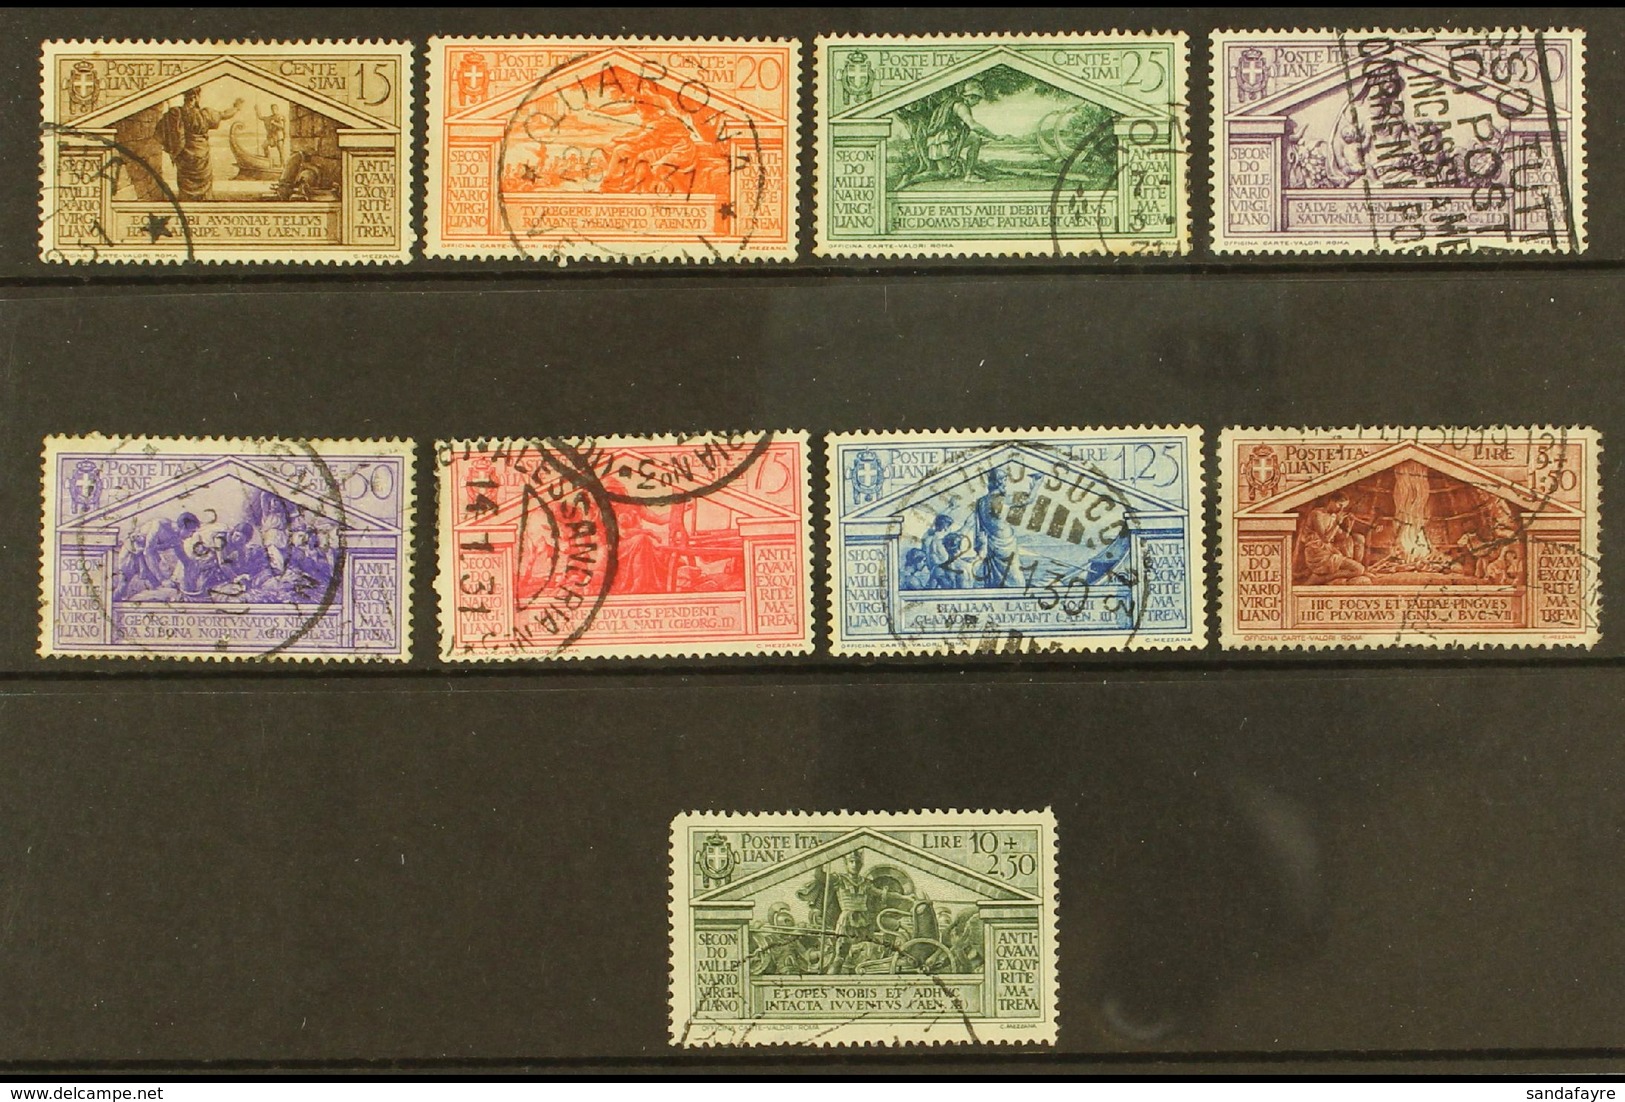 1930 Virgil Bi-millenary Postage Set Complete, Sass S57, Very Fine Used. Cat €1850 (£1400) (9 Stamps) For More Images, P - Ohne Zuordnung